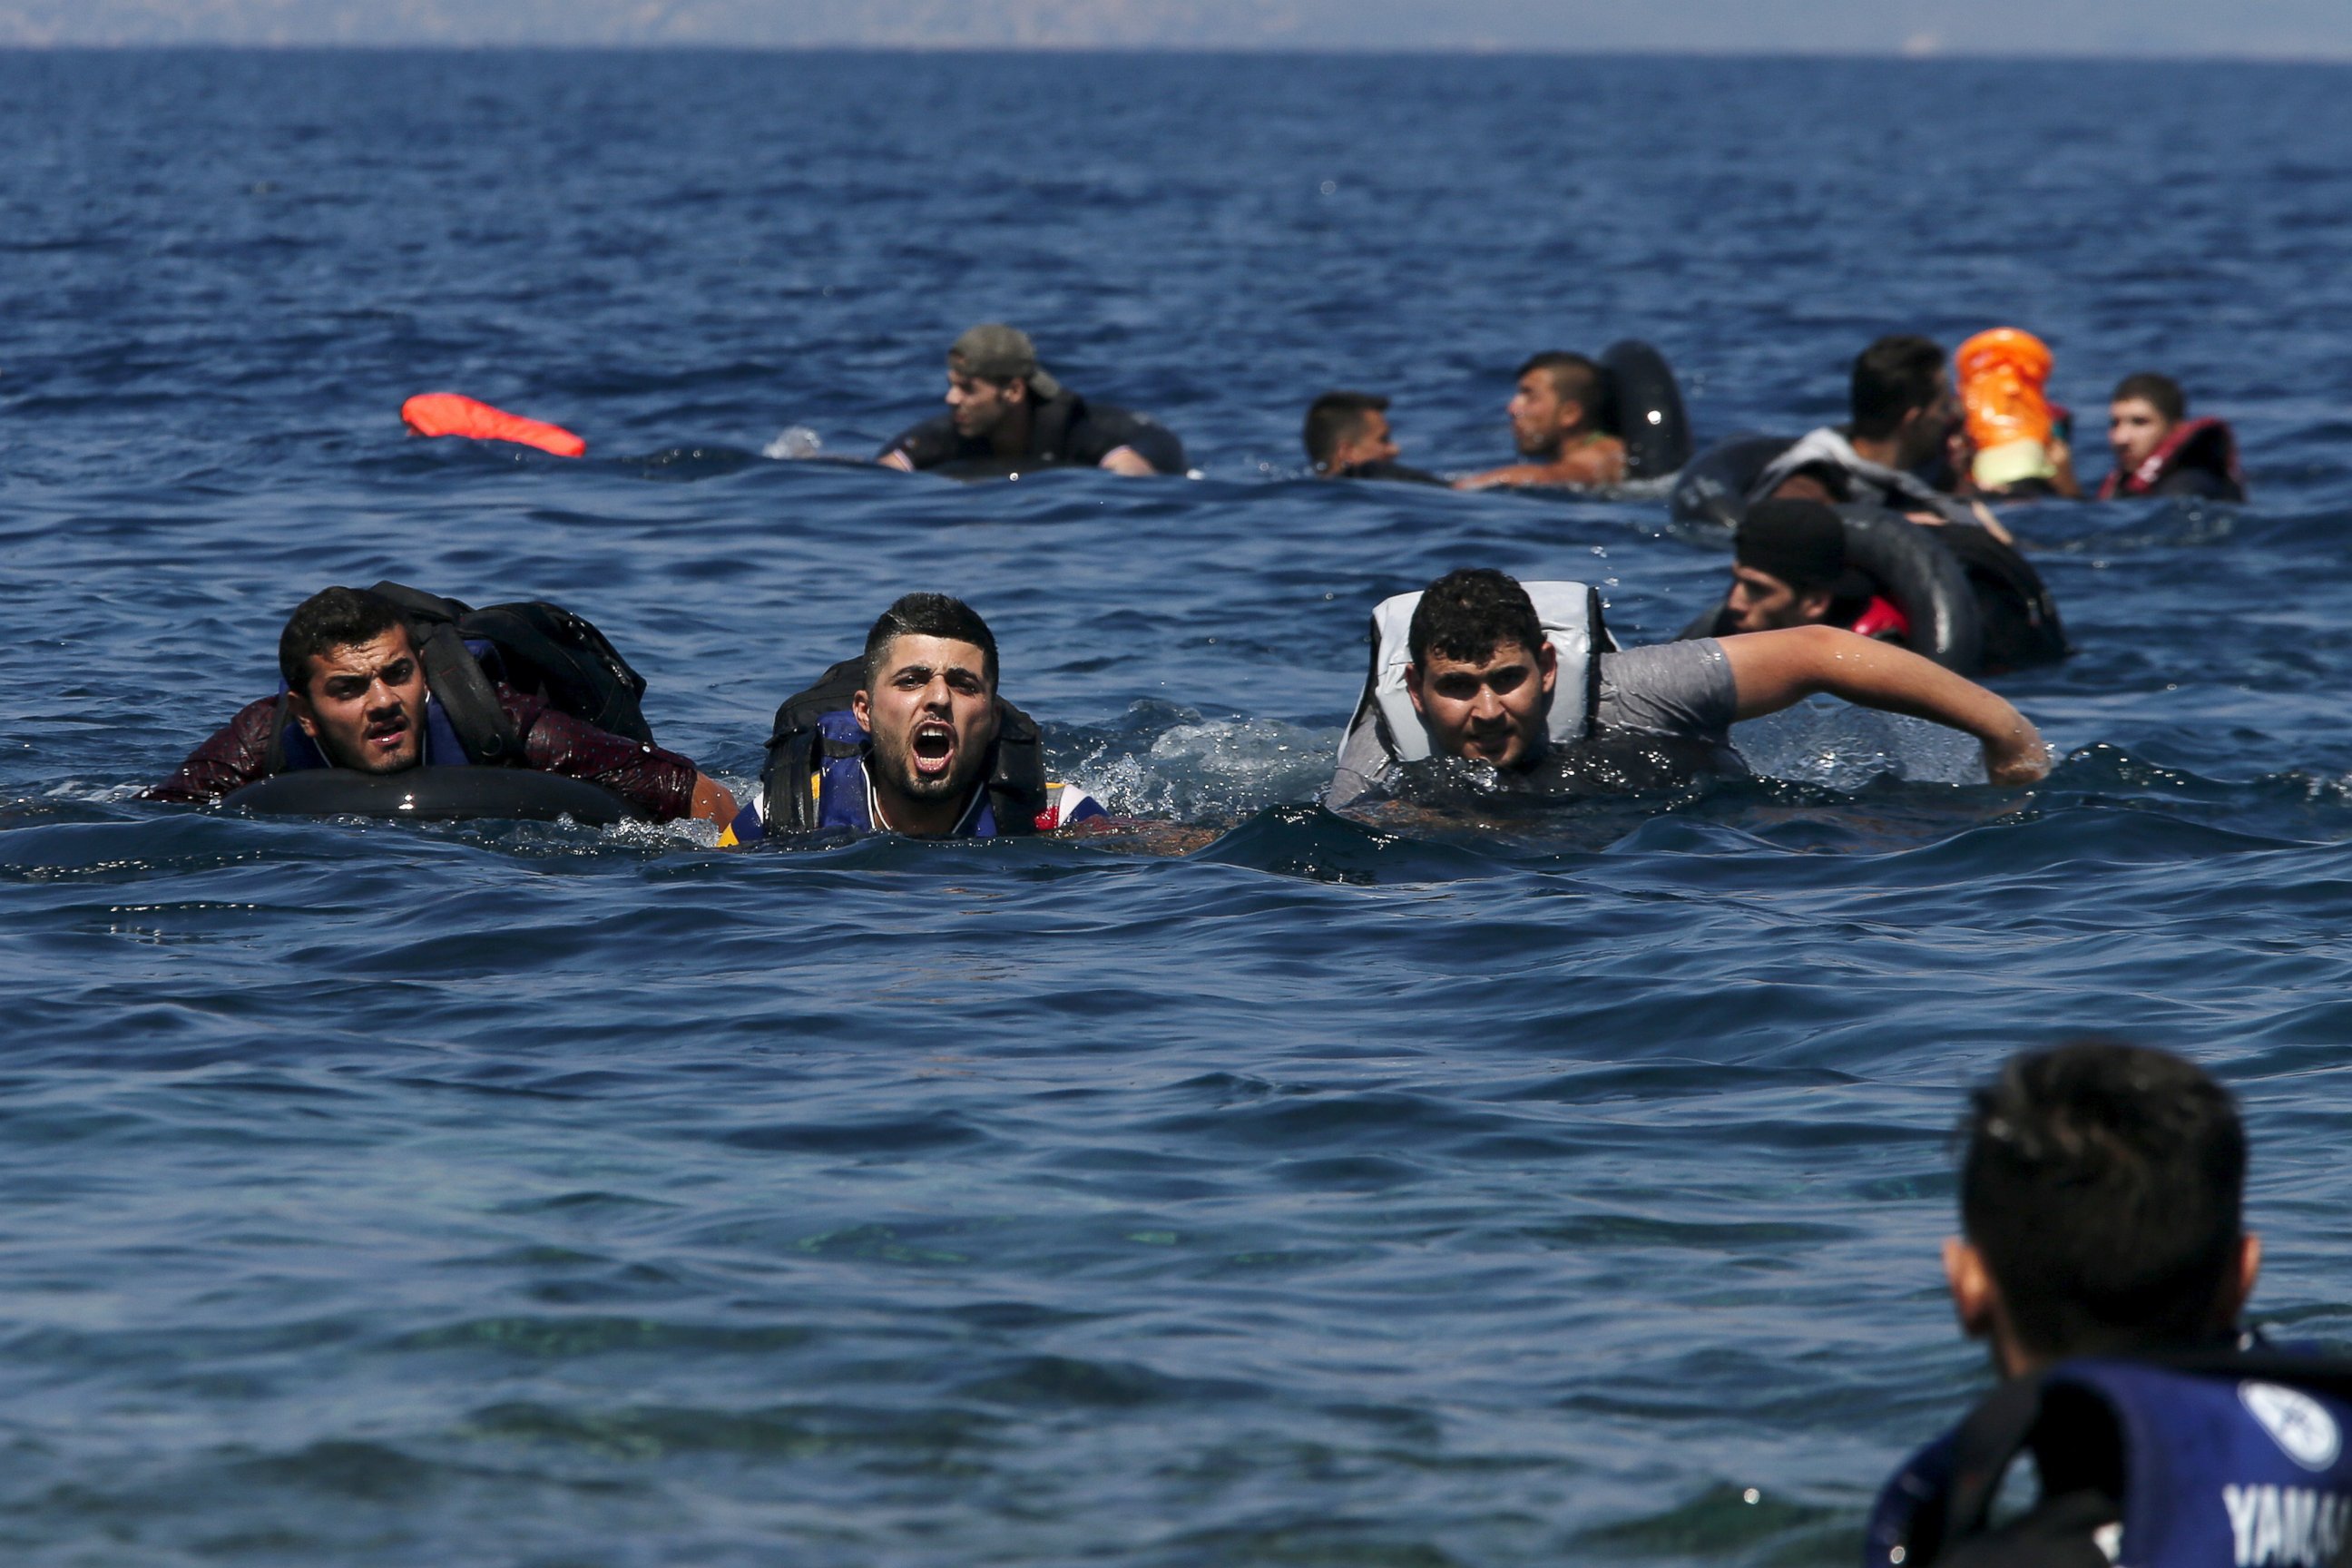 PHOTO: A refugee shouts as he swims towards the shore after a dinghy carrying Syrian and Afghan refugees deflated about 100 meters before reaching the Greek island of Lesbos, Sept. 13, 2015.